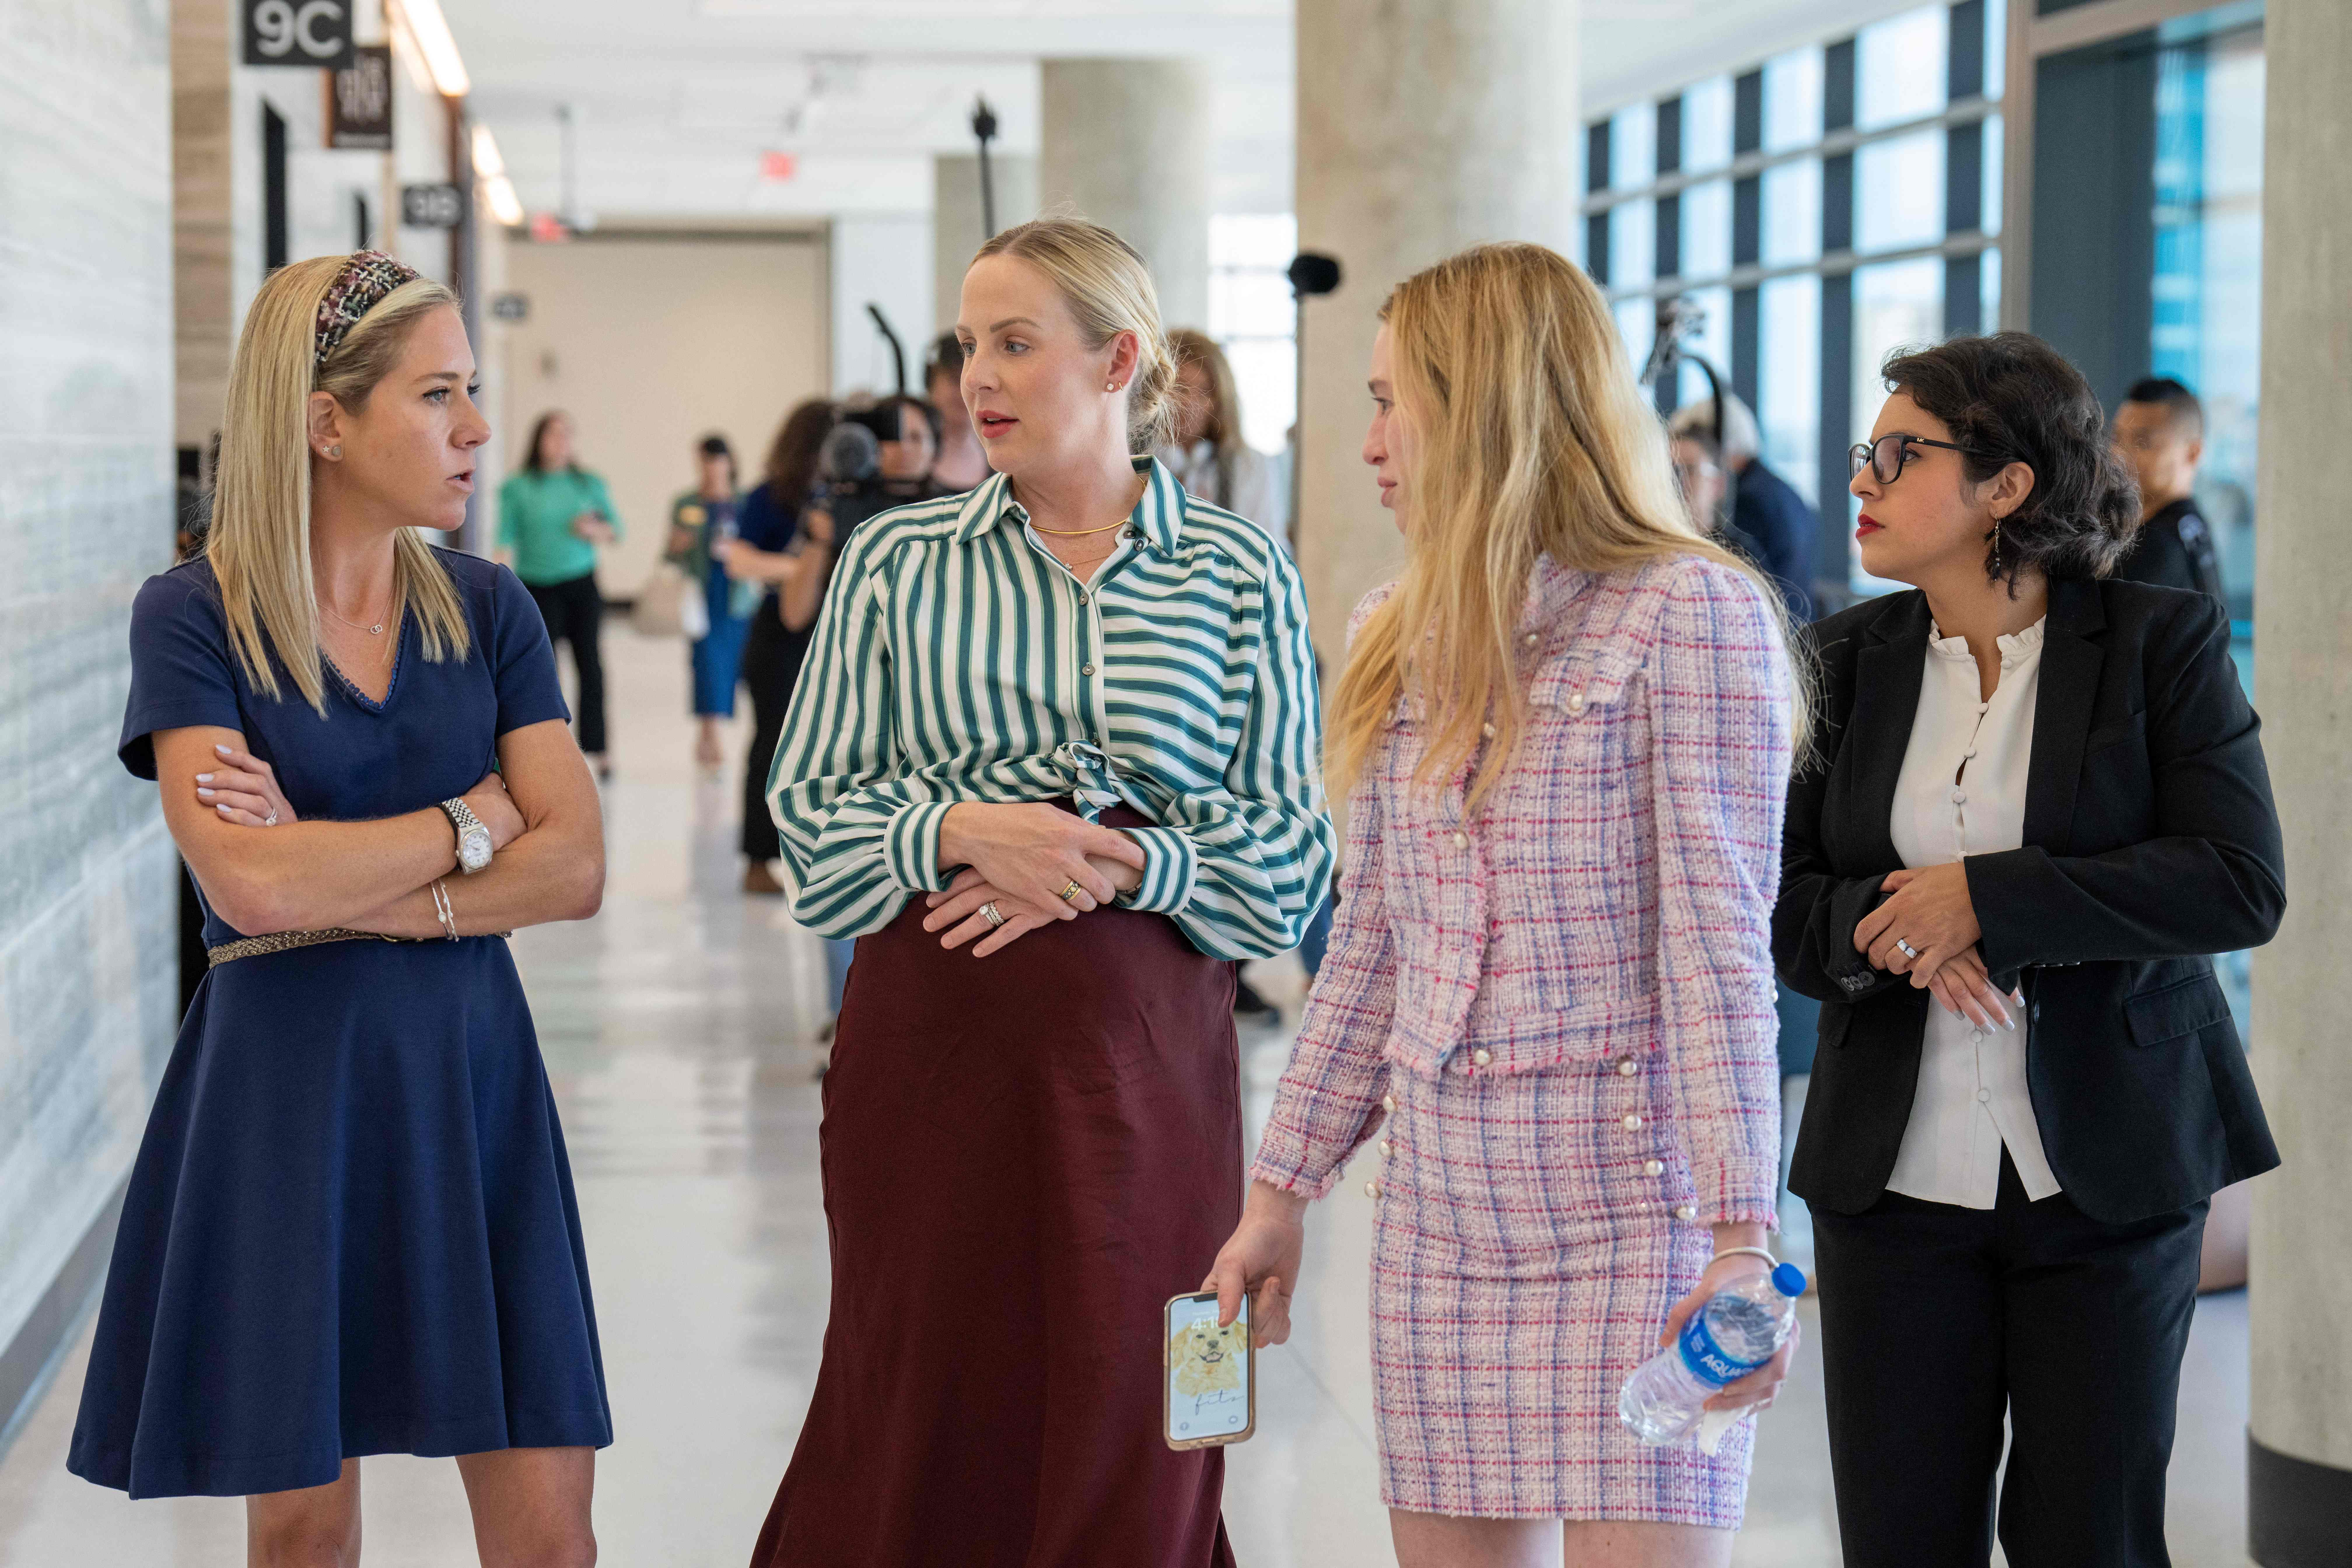 Plaintiffs Amanda Zurawski, Austin Dennard, Taylor Edwards and Elizabeth Waller appear inside a Texas courthouse on 20 July during hearings in their lawsuit against the state’s anti-abortion law